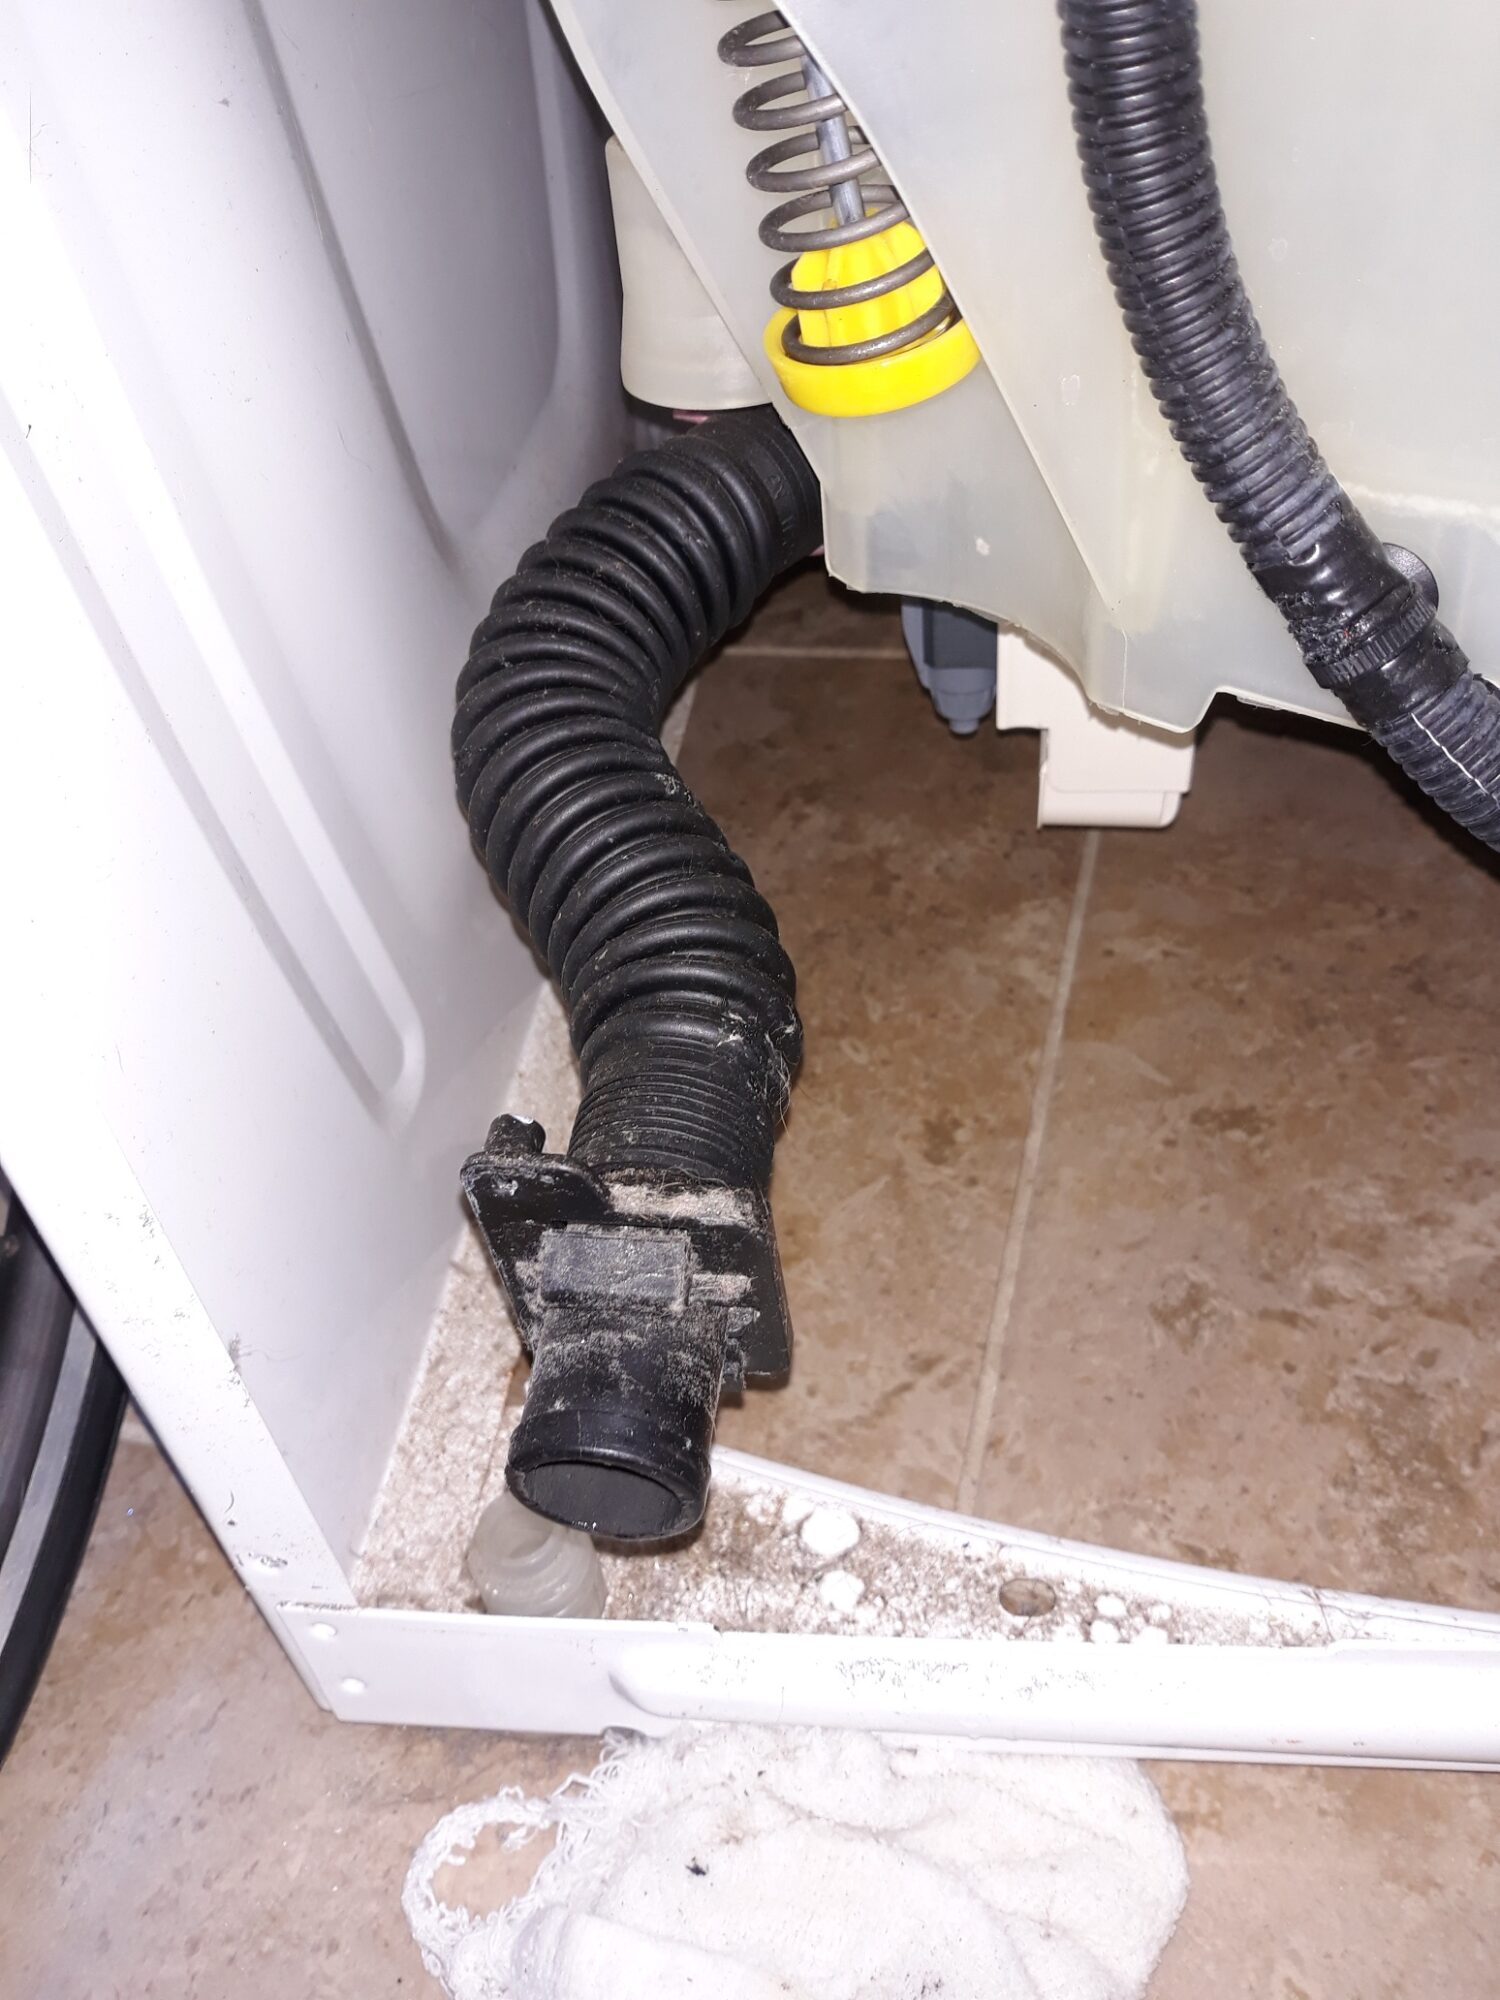 appliance repair washer repair repair required replacement of the broken drain hose with a new part e myrtle st howey-in-the-hills fl 34737